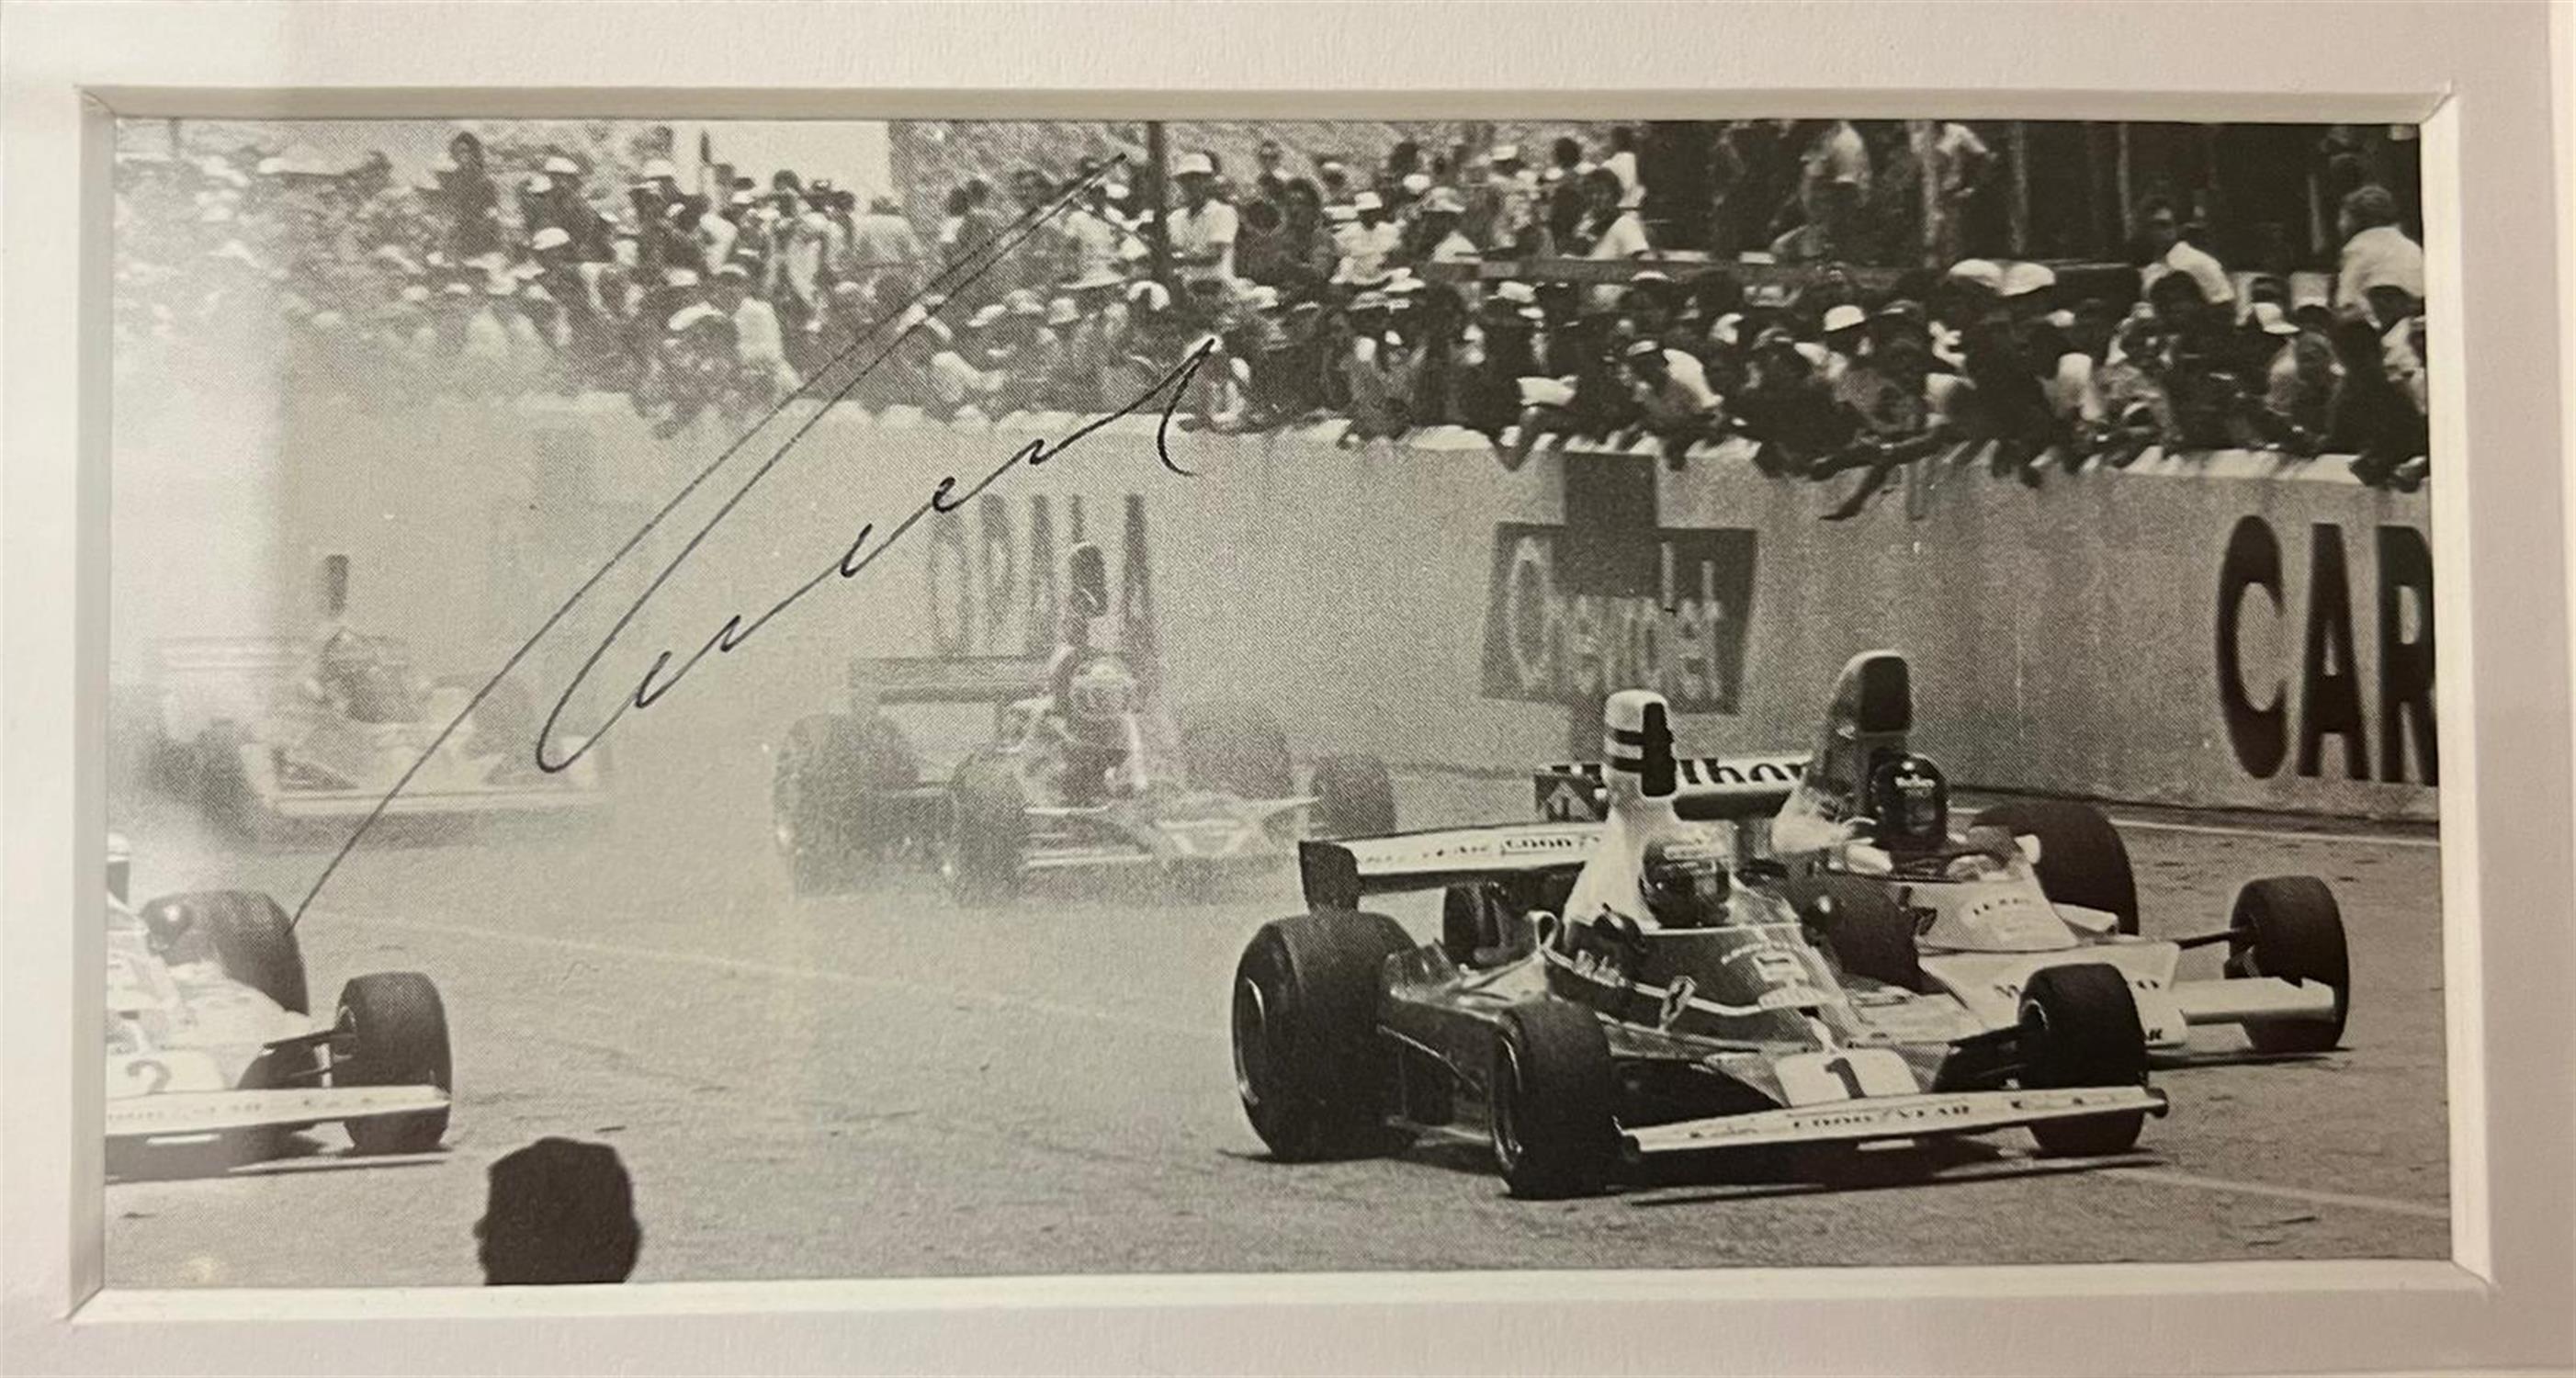 Lauda v Hunt Framed Production with signed B/W images of Both Drivers - Image 2 of 5